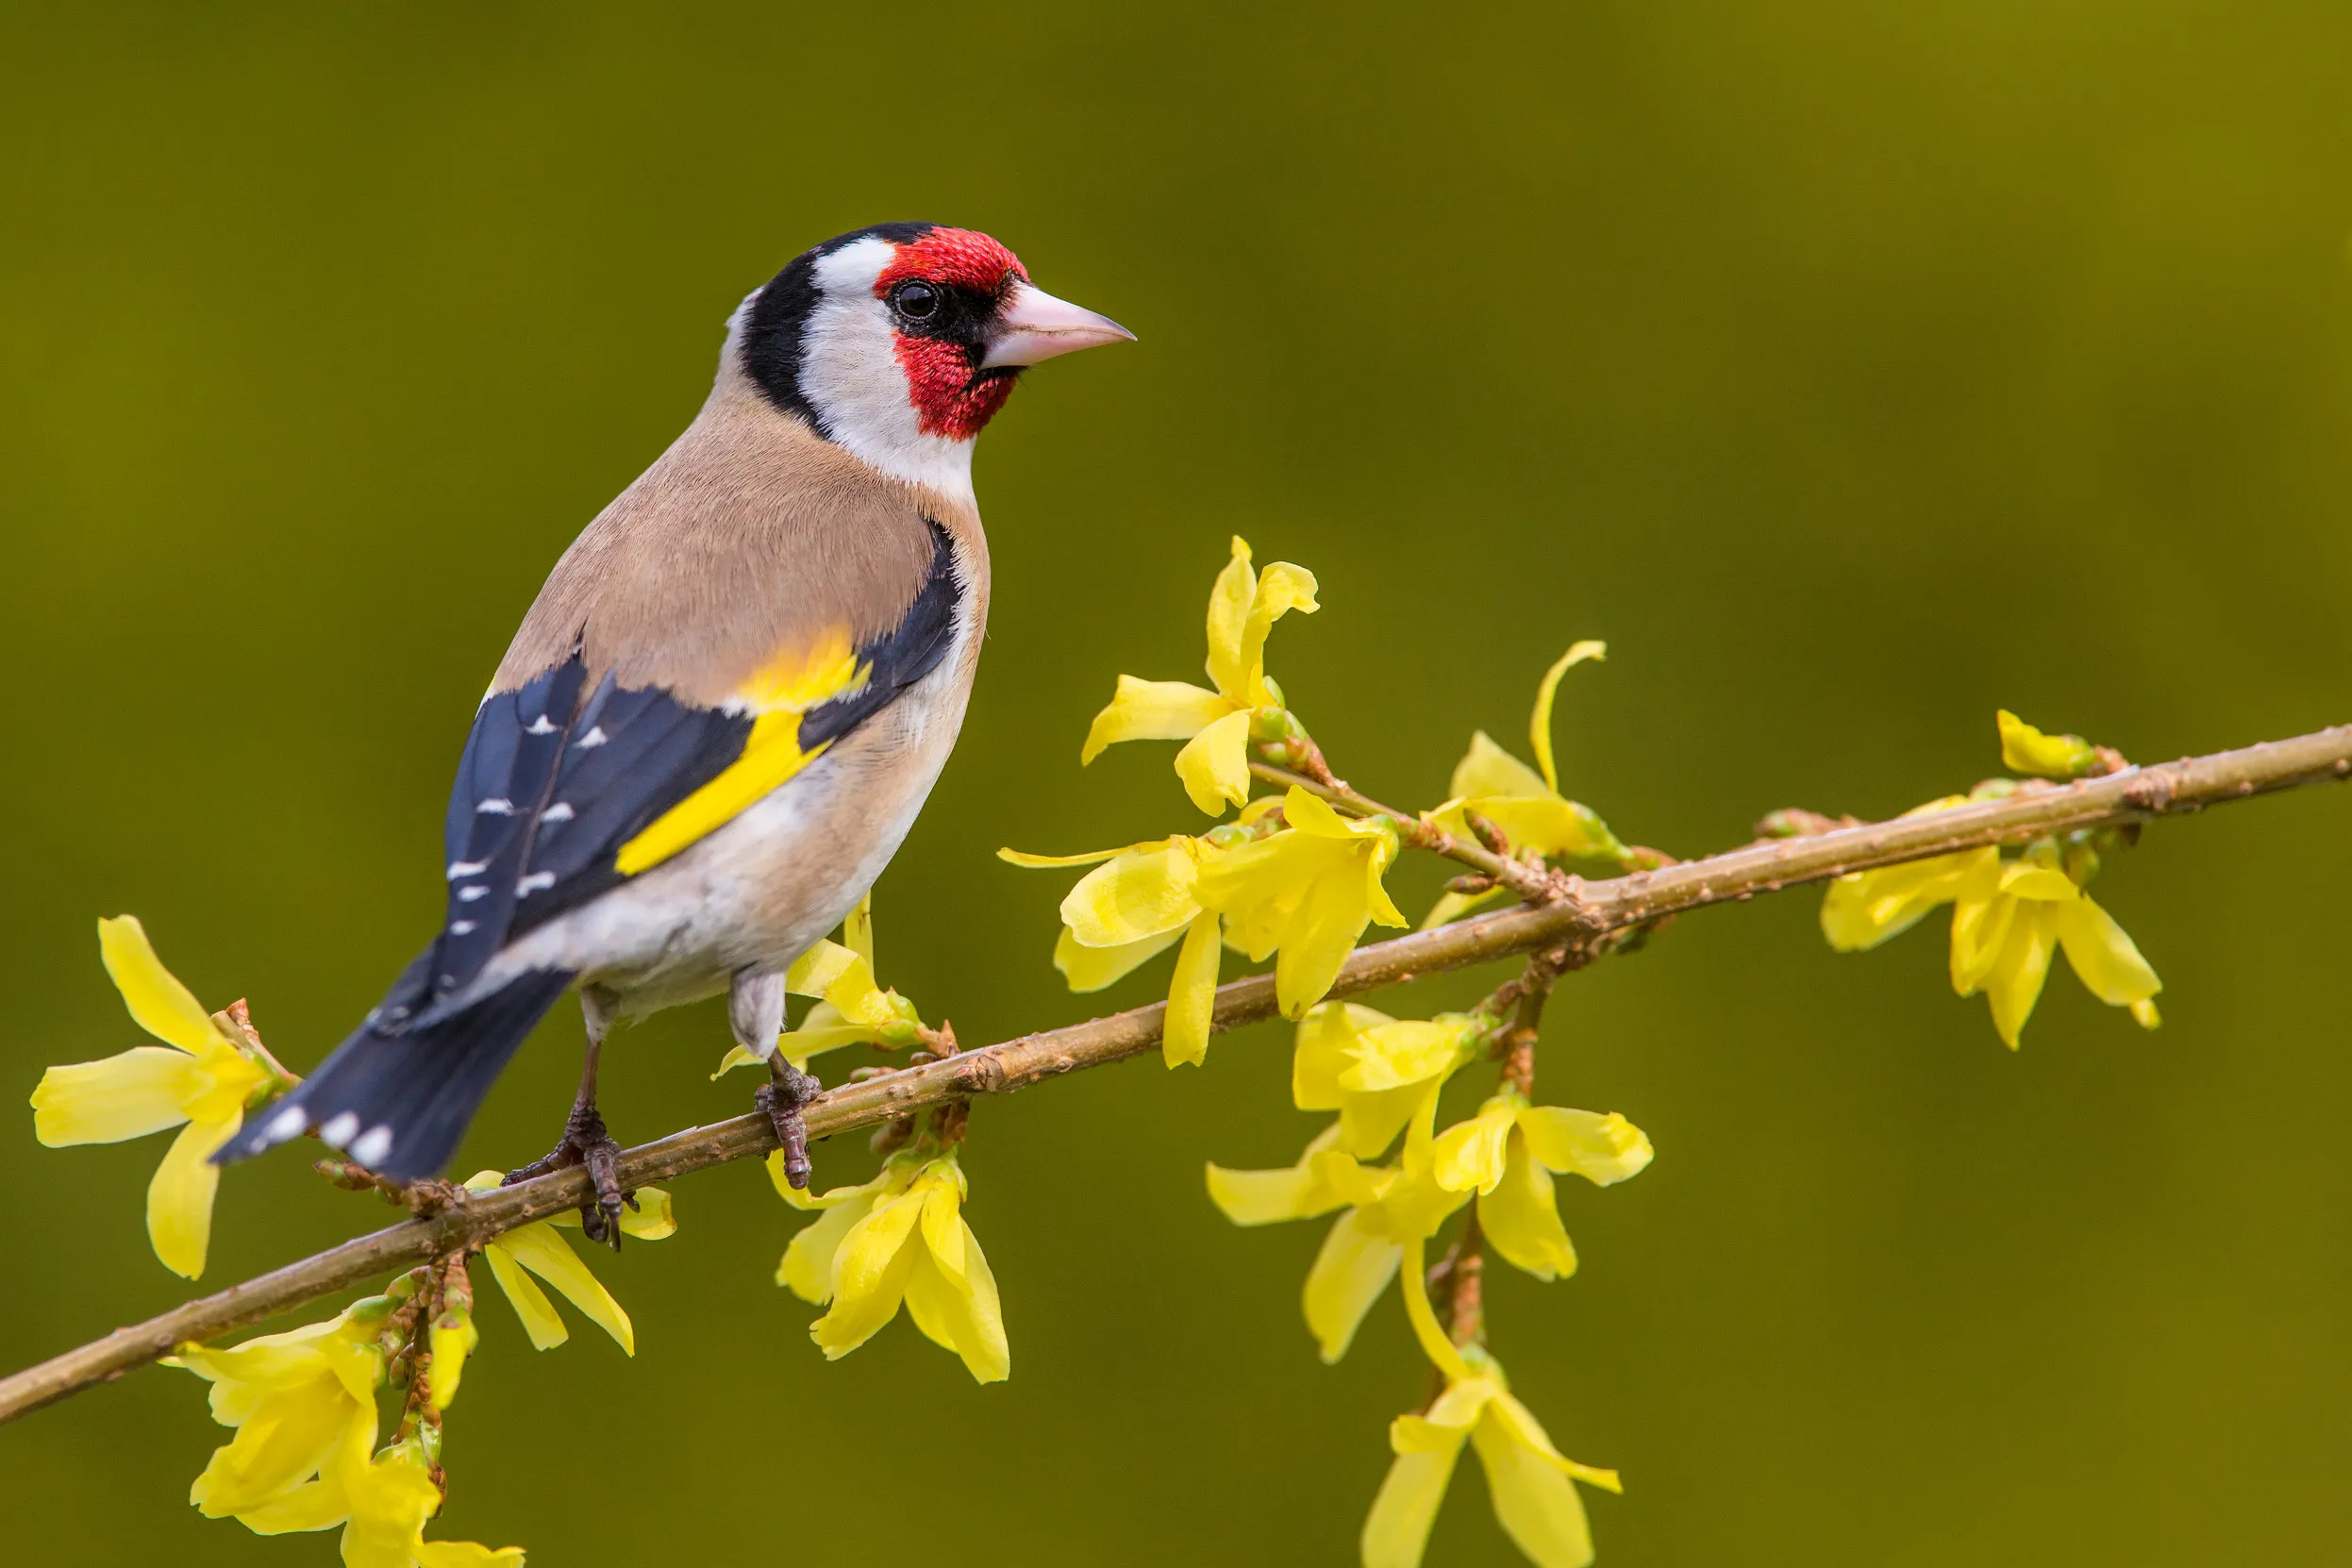 European Goldfinch perched on a branch with yellow leaves.